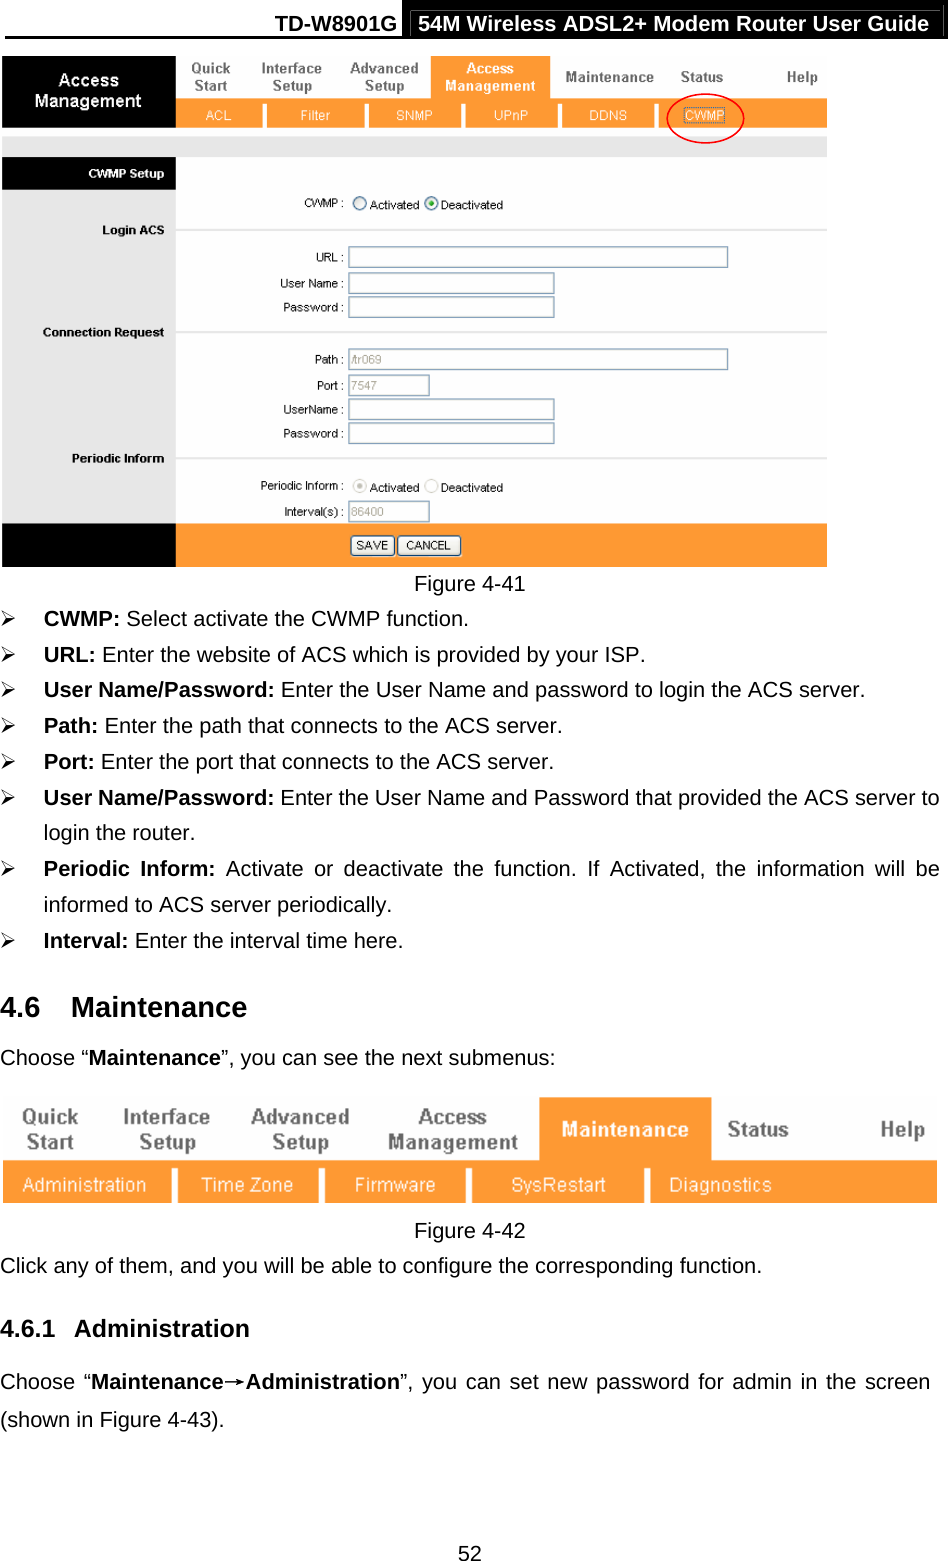 TD-W8901G 54M Wireless ADSL2+ Modem Router User Guide  52 Figure 4-41 ¾ CWMP: Select activate the CWMP function. ¾ URL: Enter the website of ACS which is provided by your ISP. ¾ User Name/Password: Enter the User Name and password to login the ACS server. ¾ Path: Enter the path that connects to the ACS server. ¾ Port: Enter the port that connects to the ACS server. ¾ User Name/Password: Enter the User Name and Password that provided the ACS server to login the router. ¾ Periodic Inform: Activate or deactivate the function. If Activated, the information will be informed to ACS server periodically. ¾ Interval: Enter the interval time here. 4.6  Maintenance Choose “Maintenance”, you can see the next submenus:  Figure 4-42 Click any of them, and you will be able to configure the corresponding function. 4.6.1  Administration Choose “Maintenance→Administration”, you can set new password for admin in the screen (shown in Figure 4-43). 